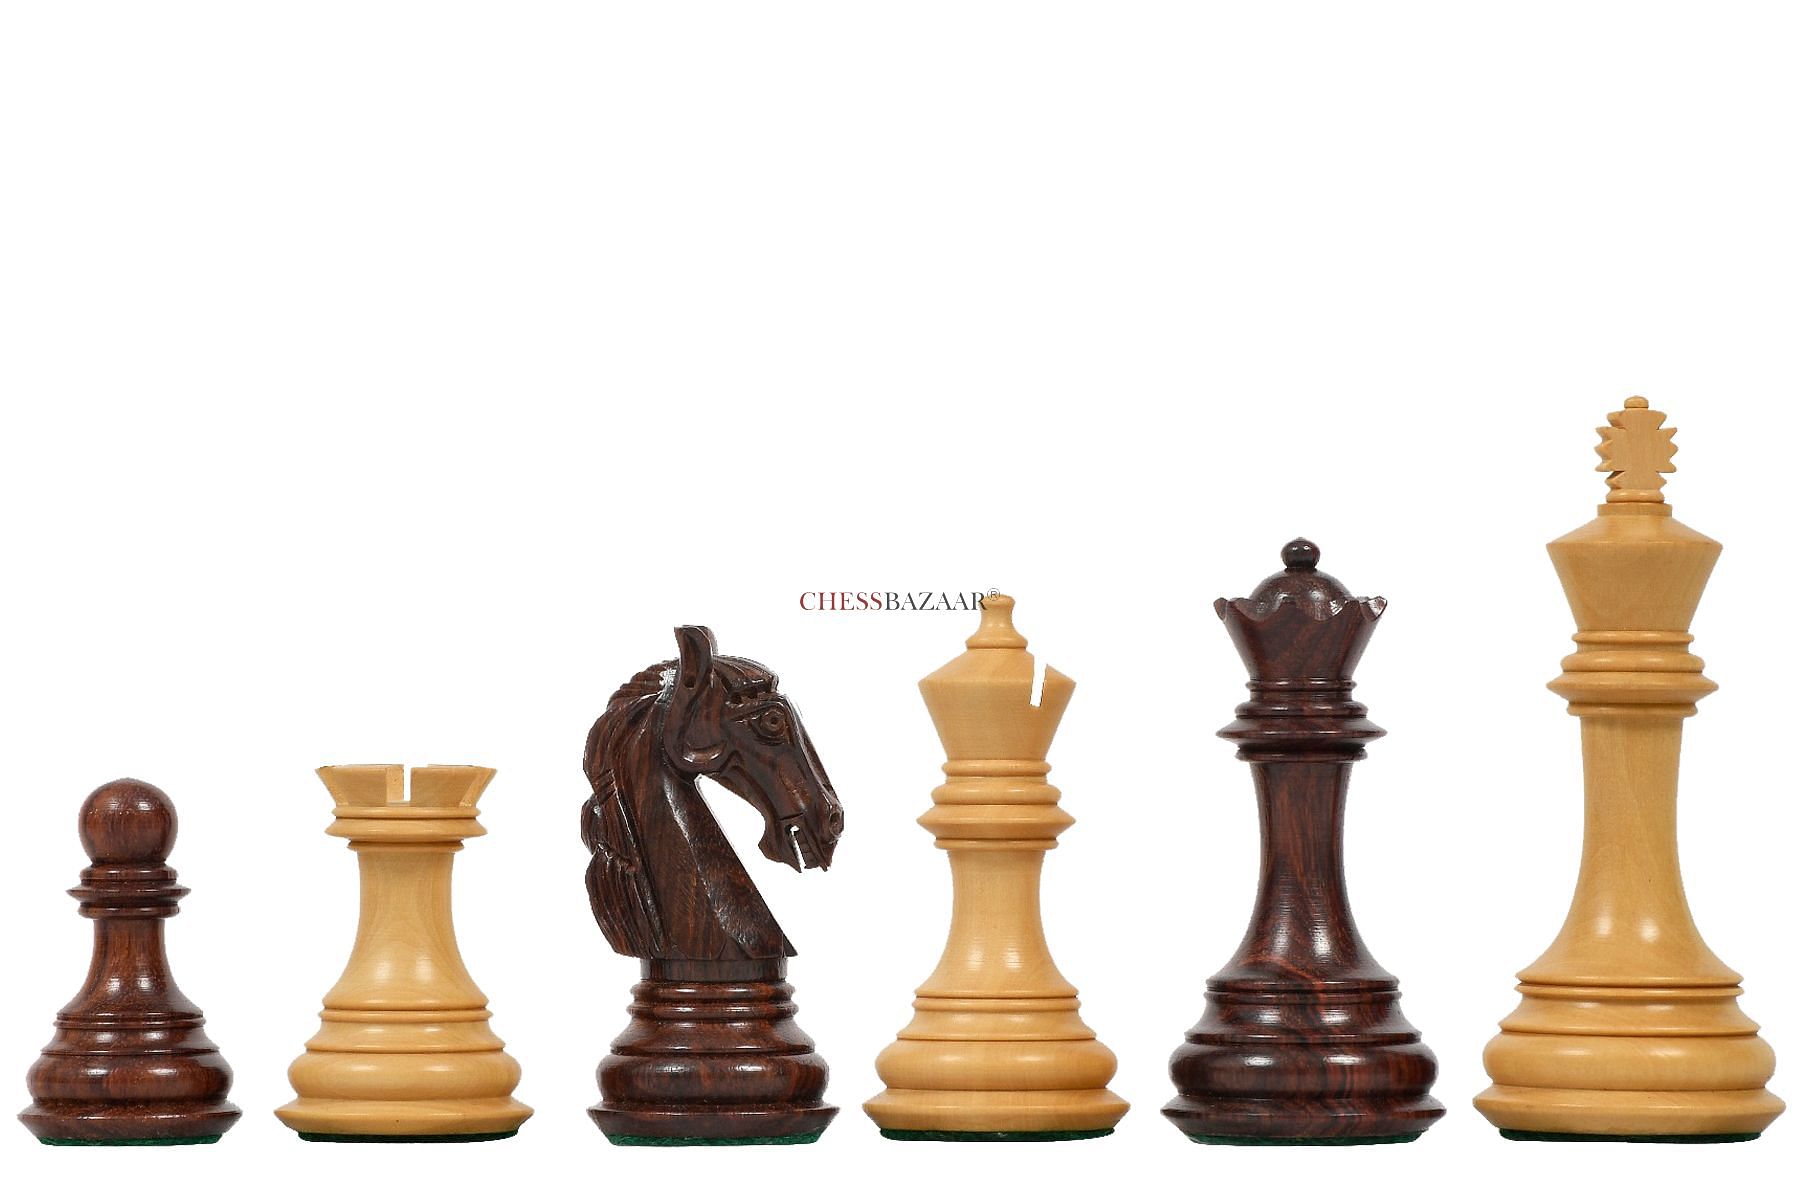 Shop now for The New Columbian Staunton Series Chess Pieces in Rose ...